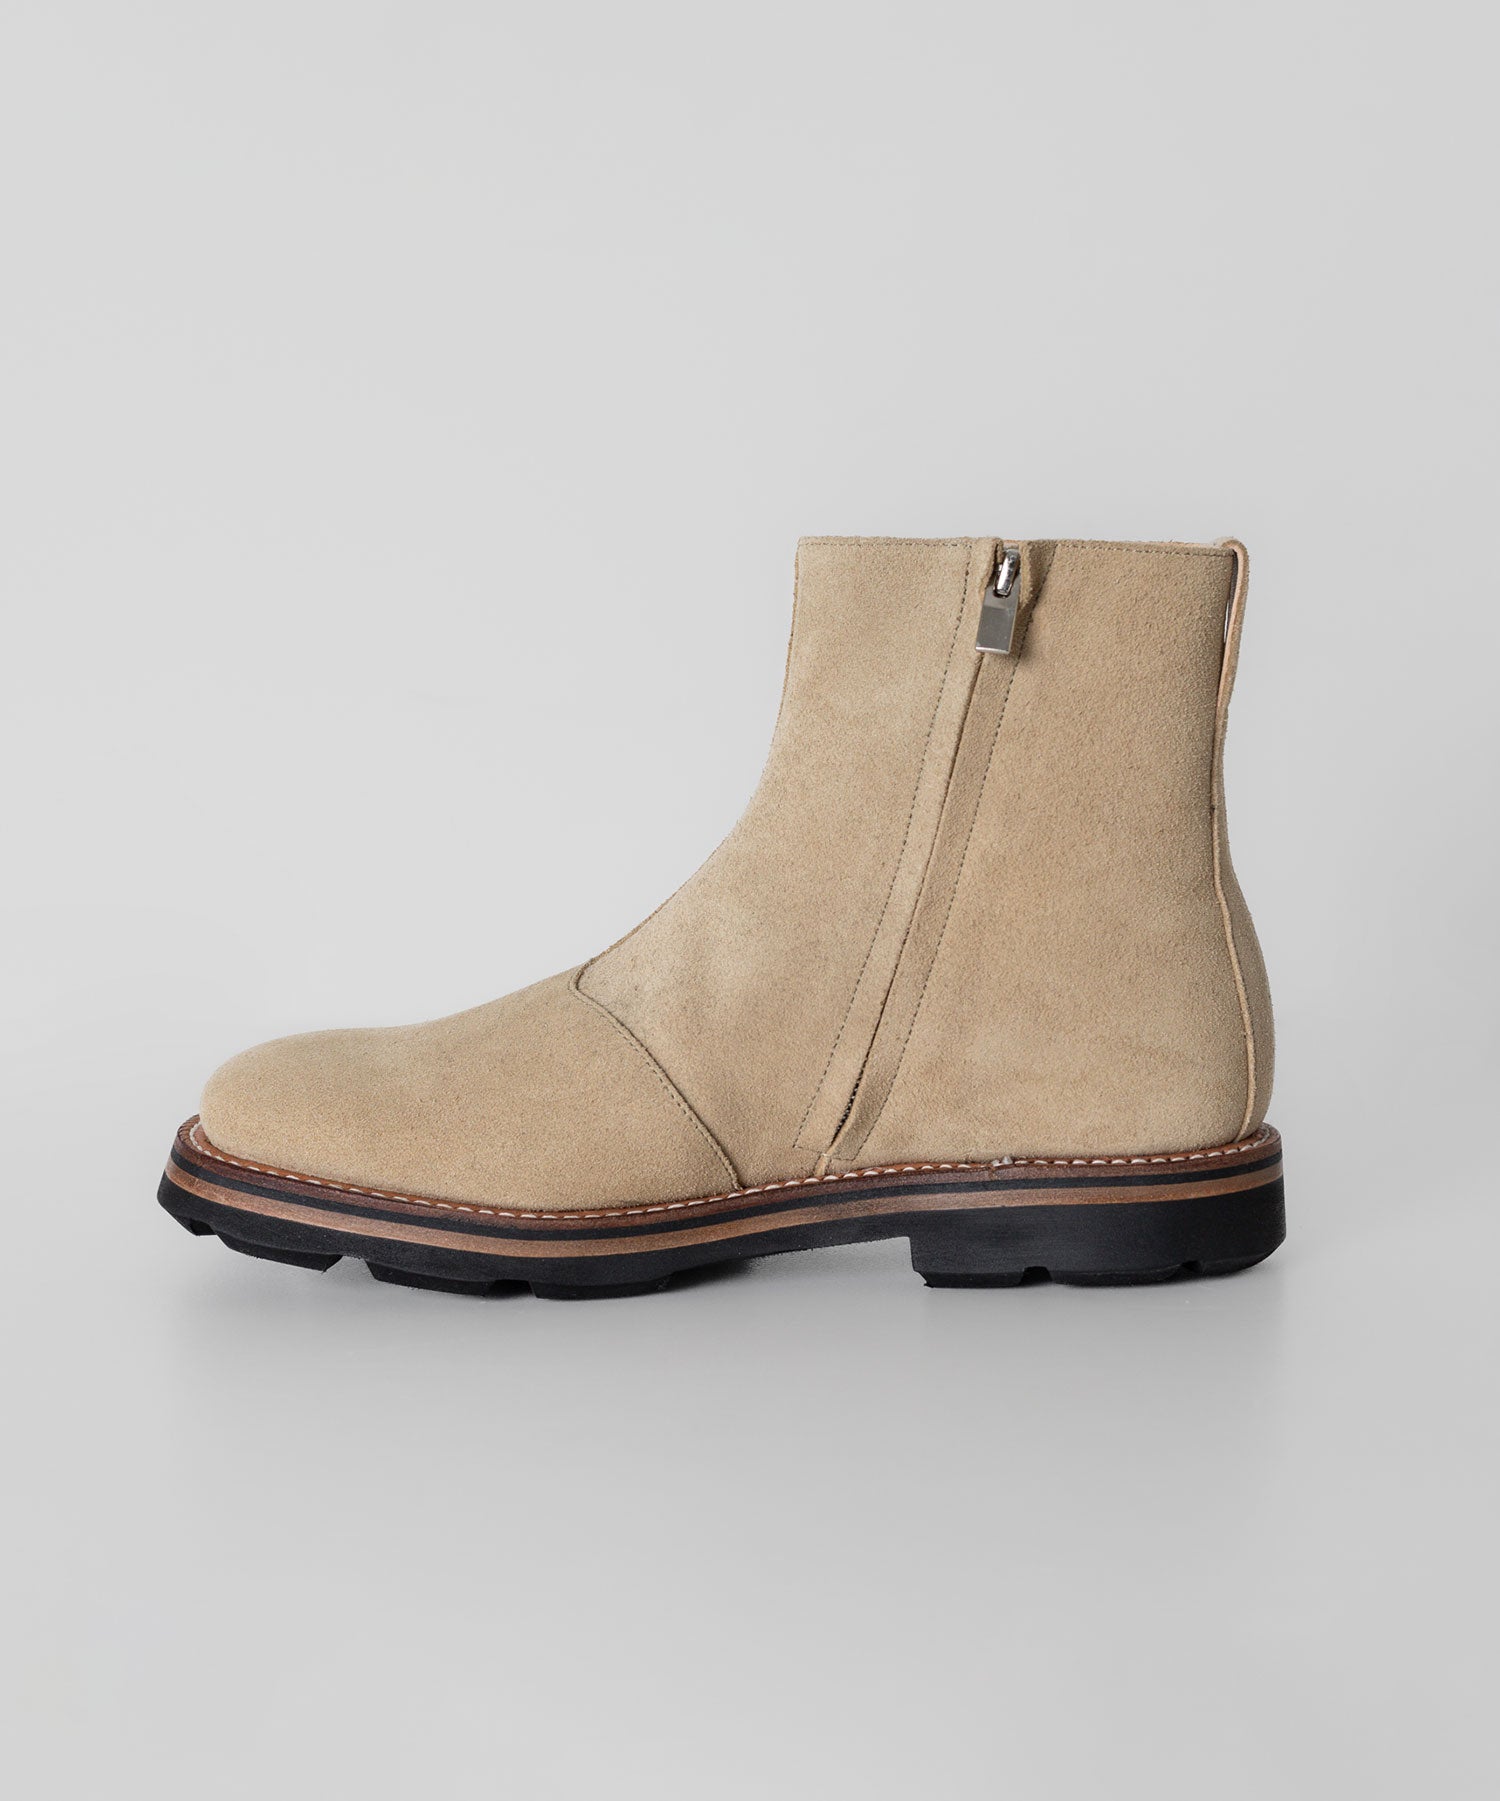 【ATTACHMENT】ATTACHMENT アタッチメントのCOW SUEDE LEATHER ENGINEER BOOTS - BEIGE 公式通販サイトsession福岡セレクトショップ